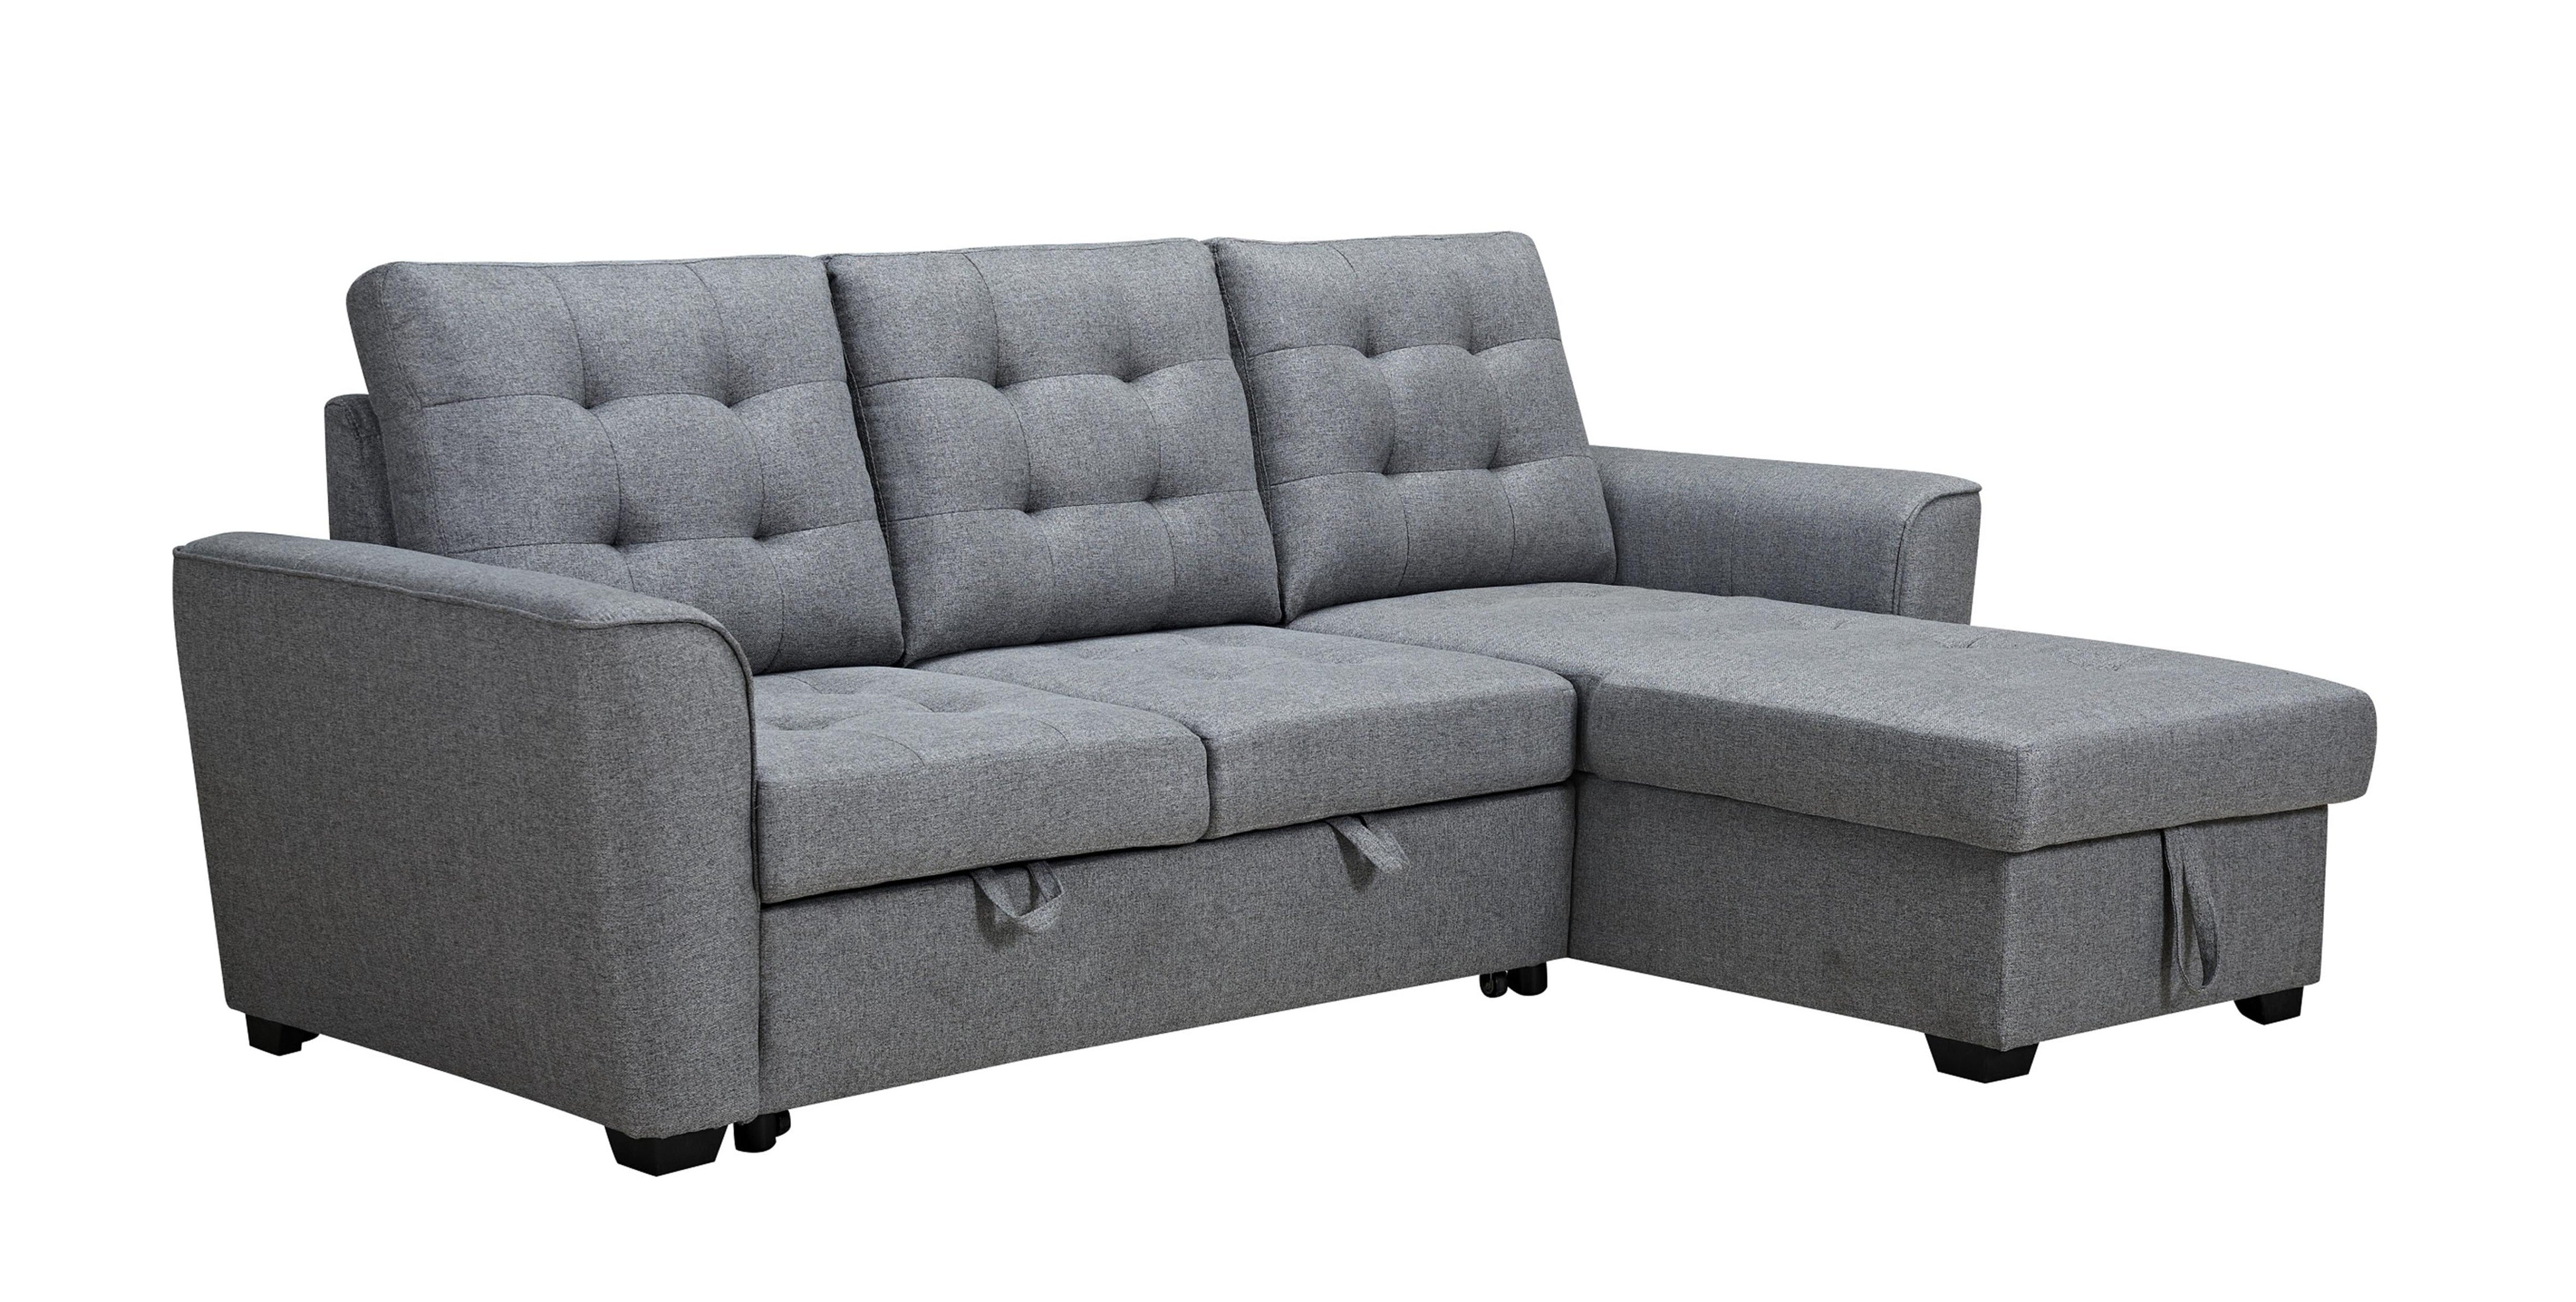 3 Seater Sofabed with Storage Chaise